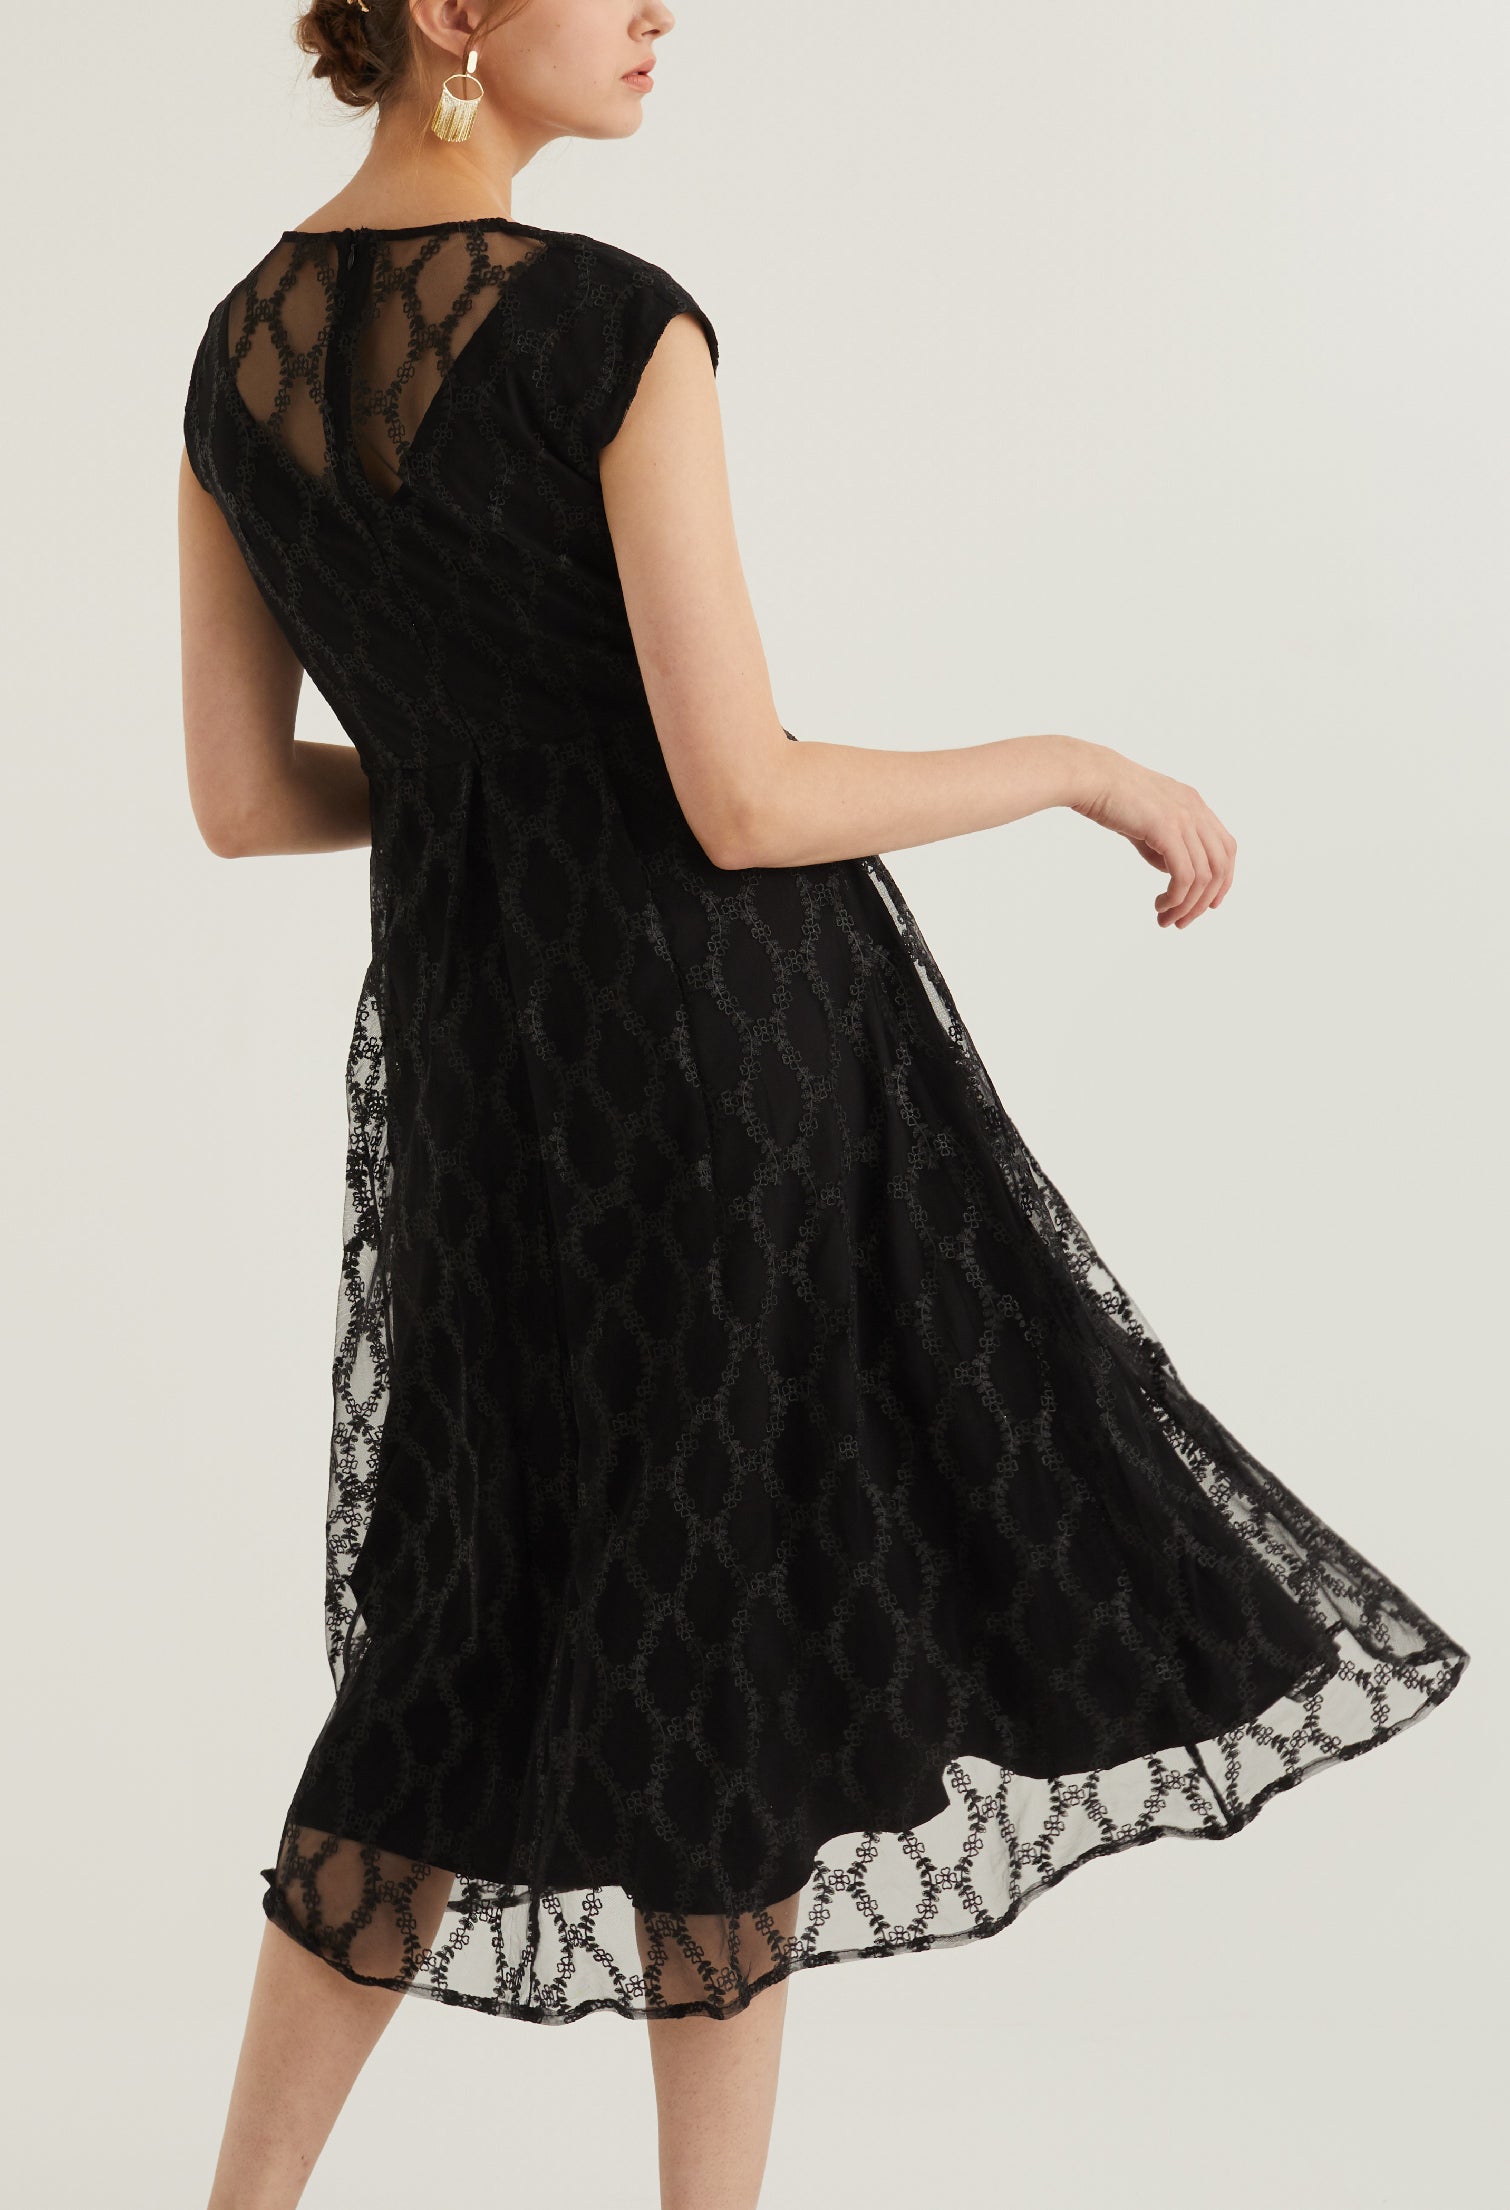 See Through Lace Detail Party Dress